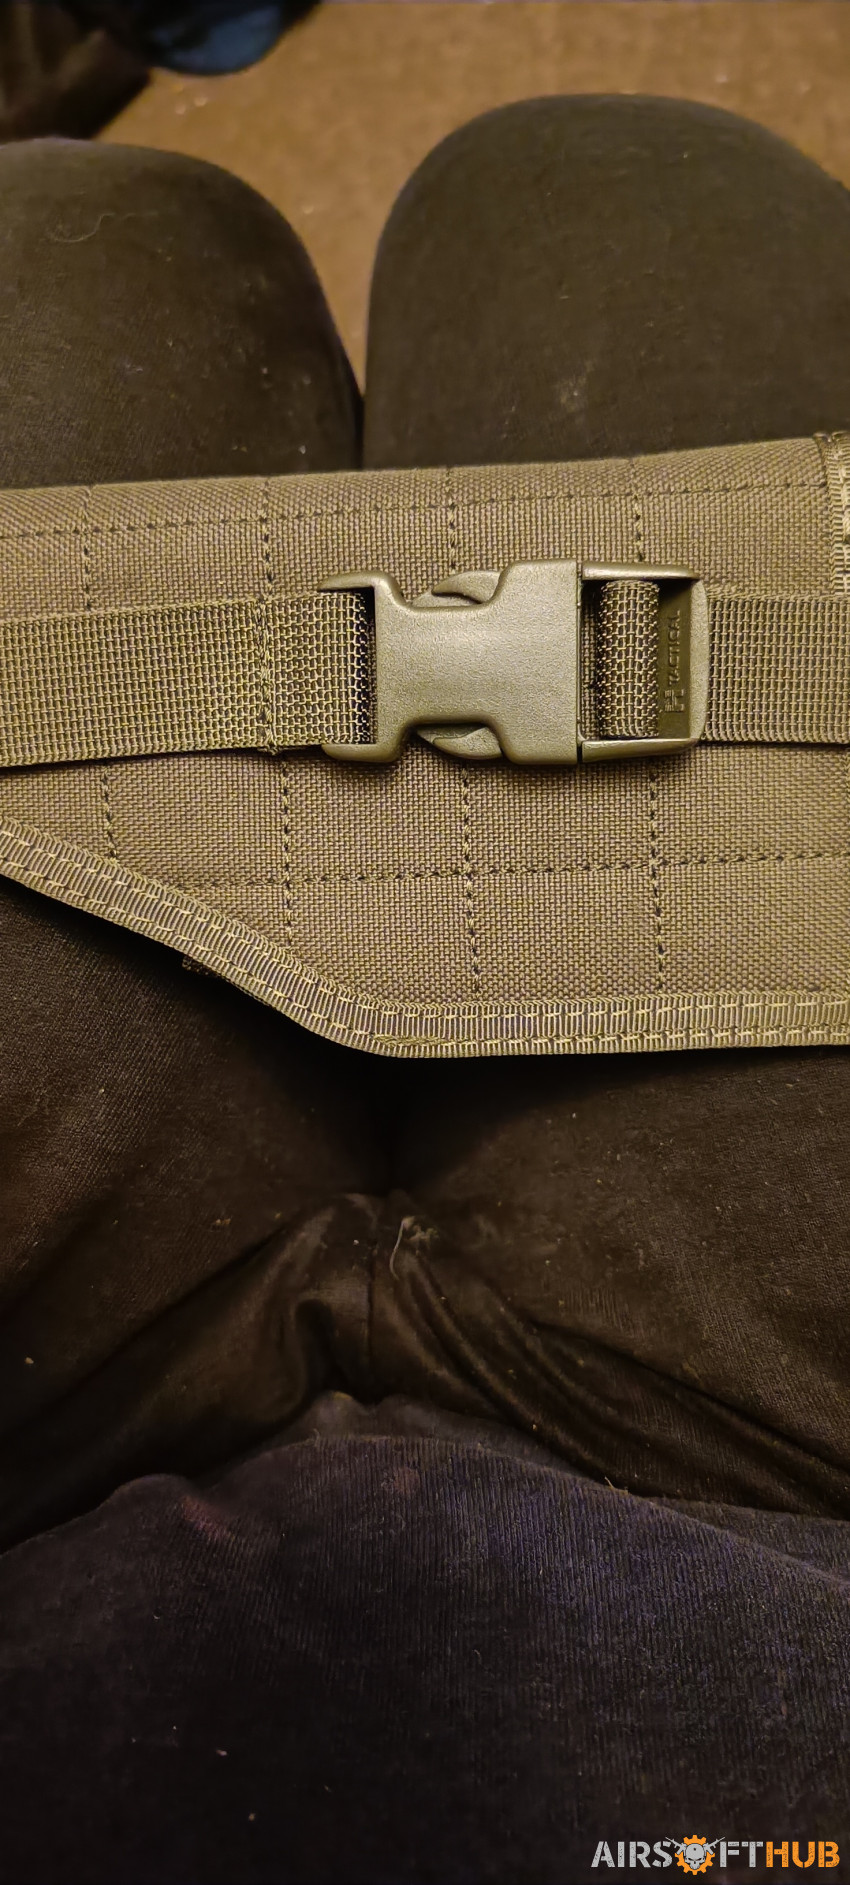 Pistol holster - Used airsoft equipment